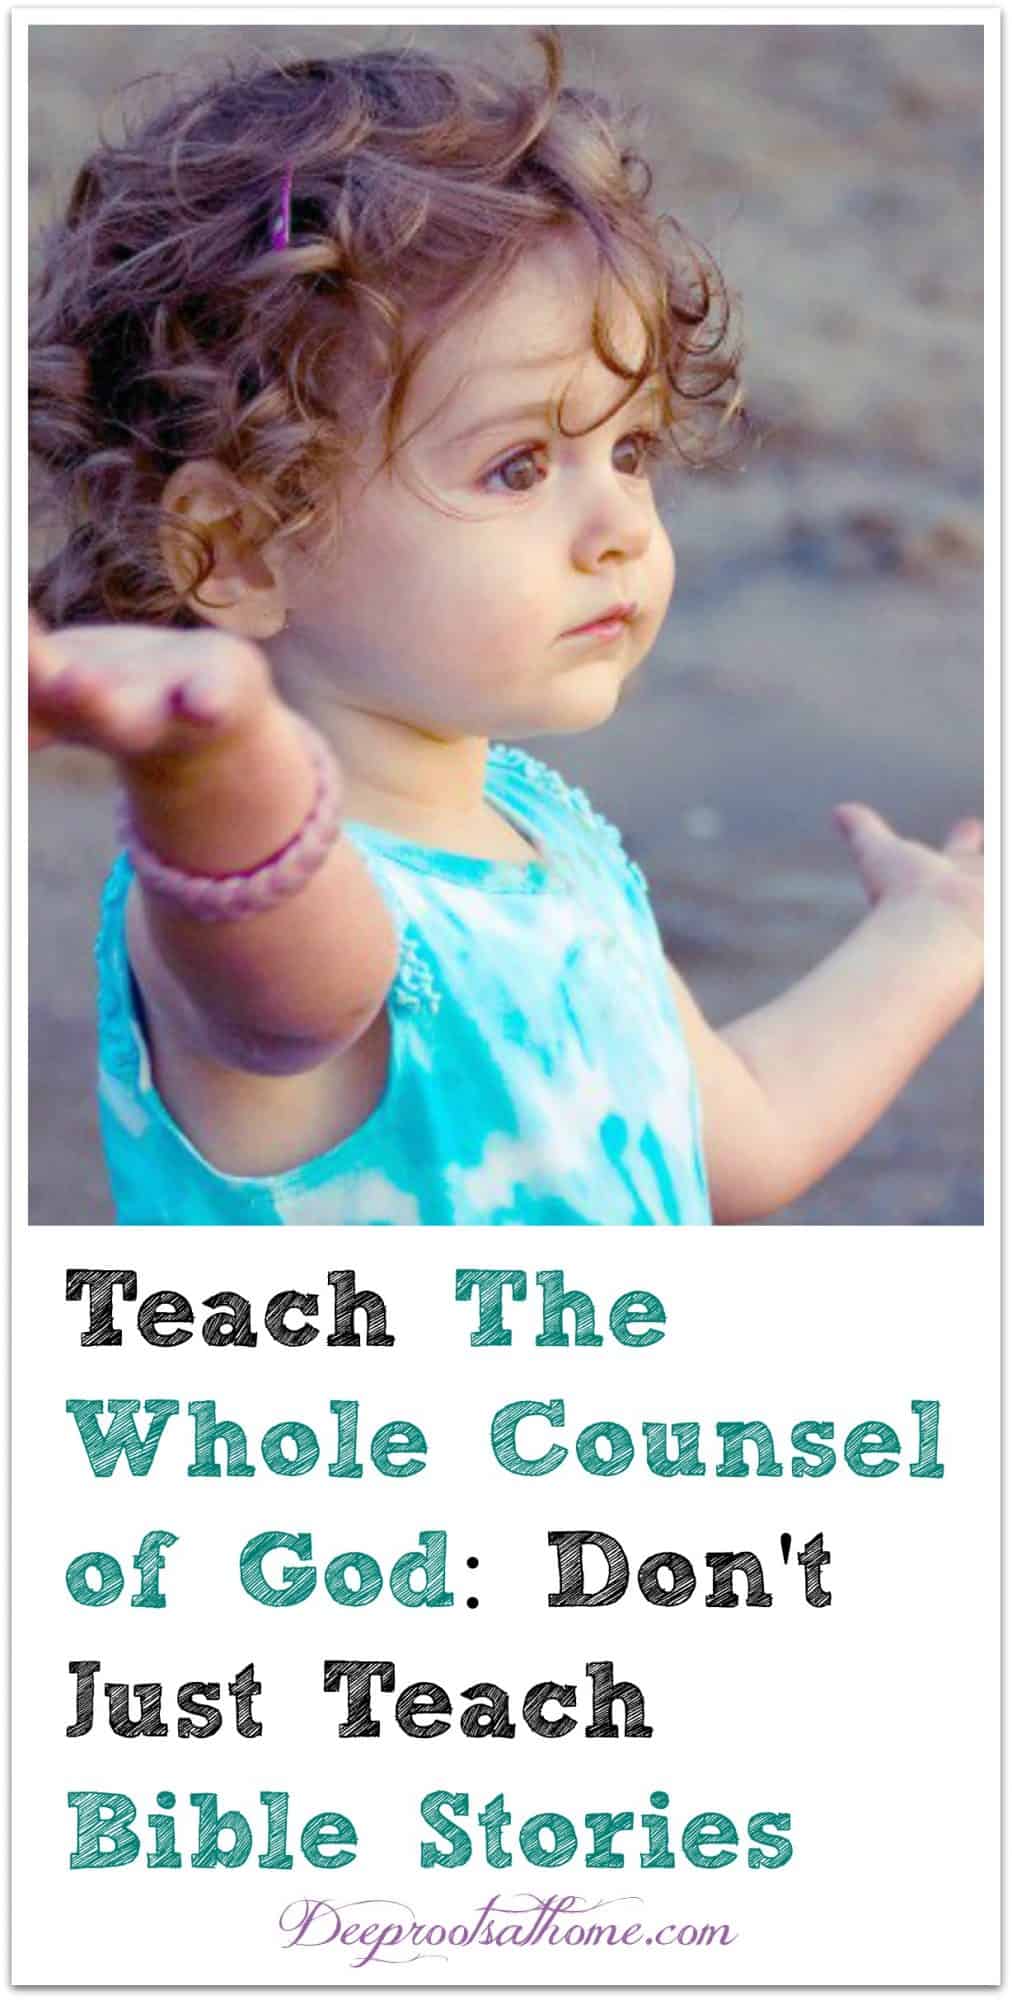 Teach The Whole Counsel of God: Don't Just Teach Bible Stories. A young girl with her hands raised in praise!